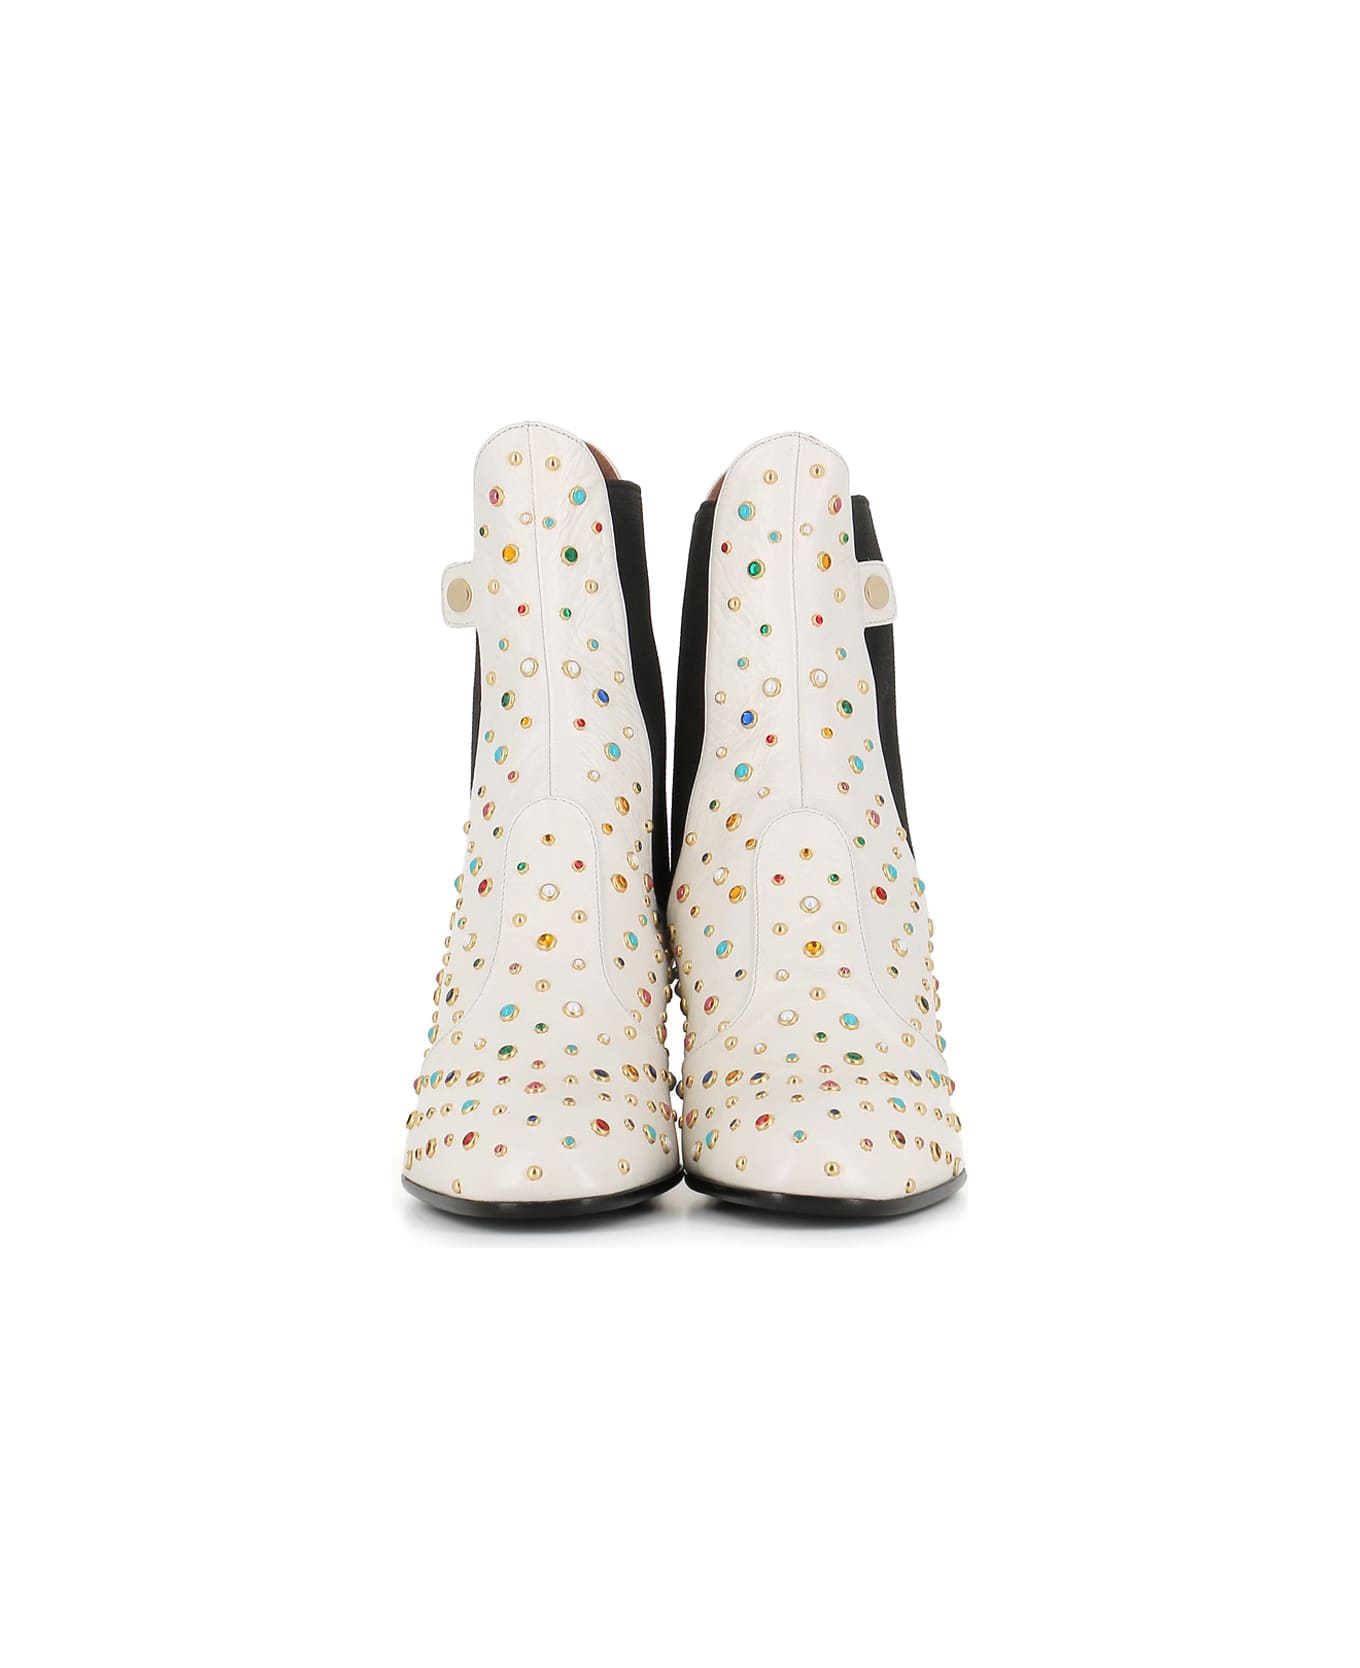 Laurence Dacade Boot Angie Multicolor Studs - White ブーツ